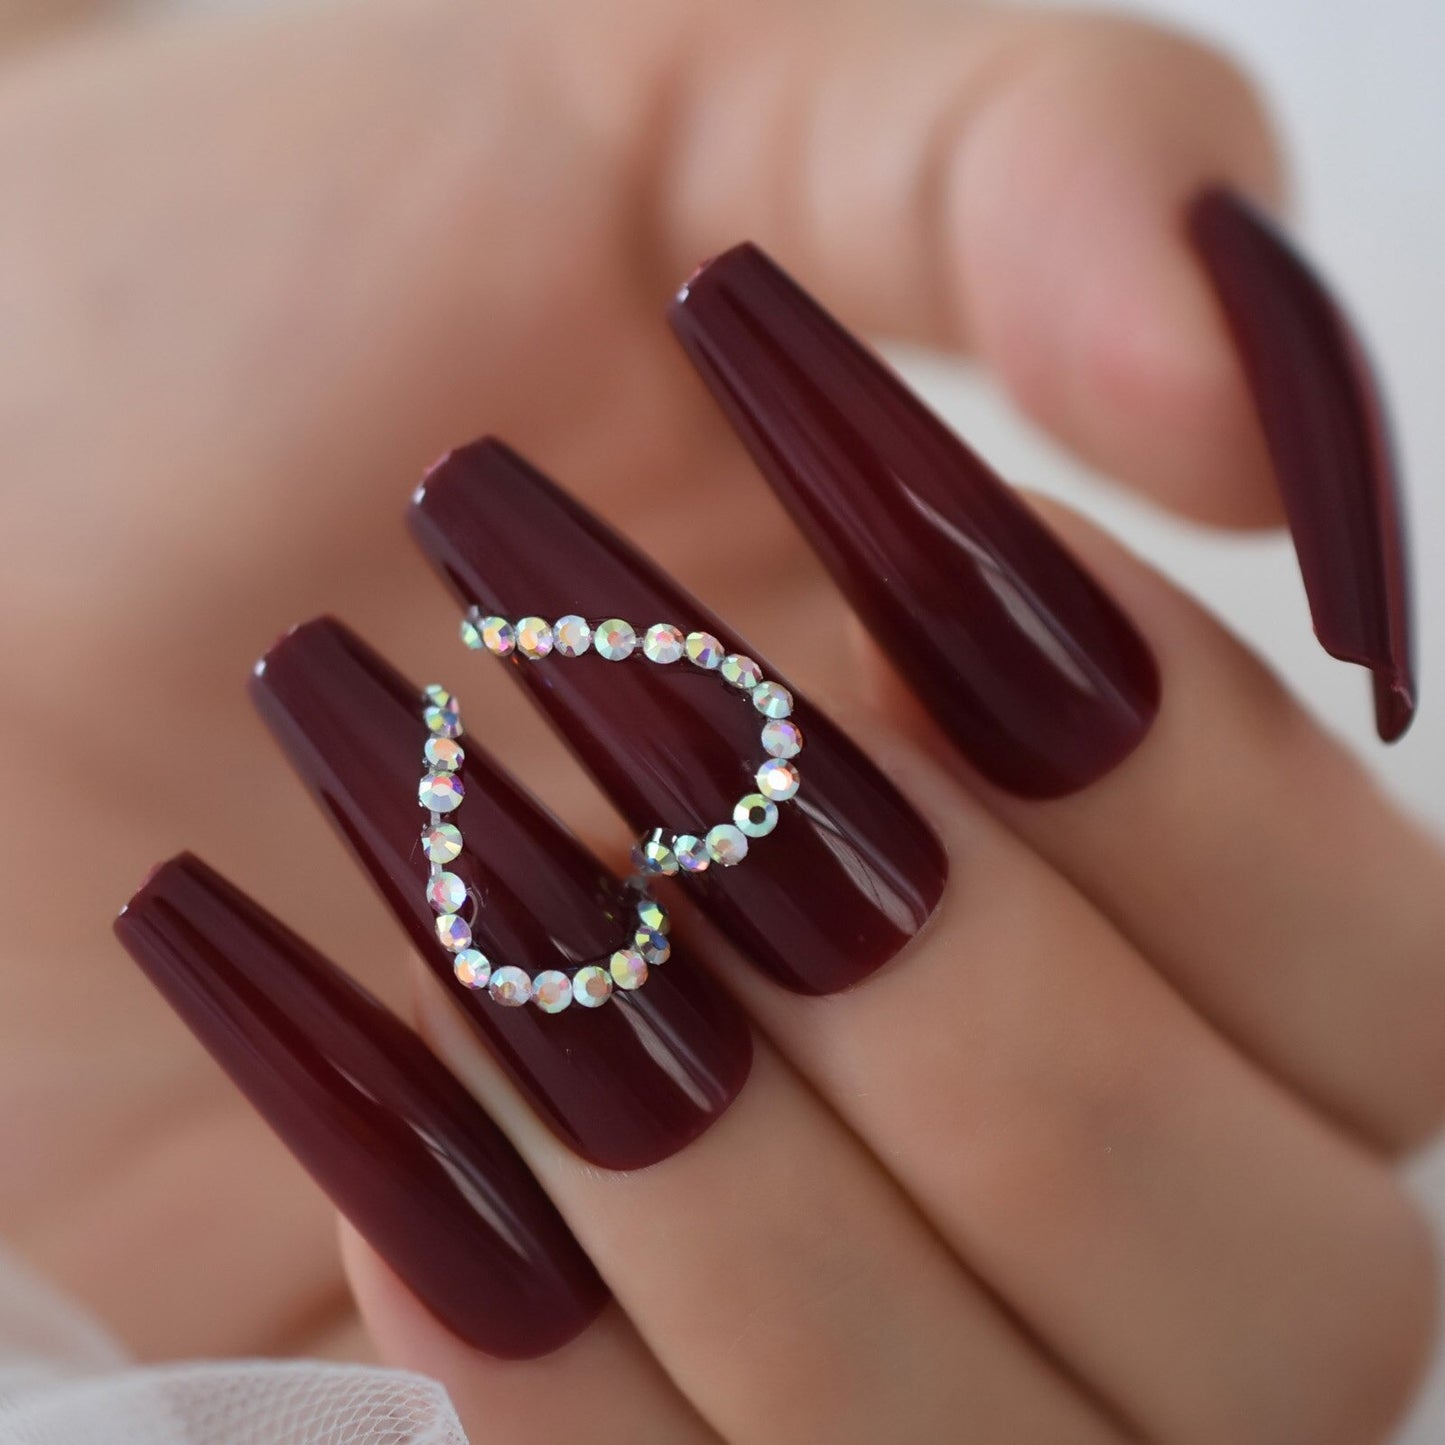 Penny Talloons Luxury Press On Nails